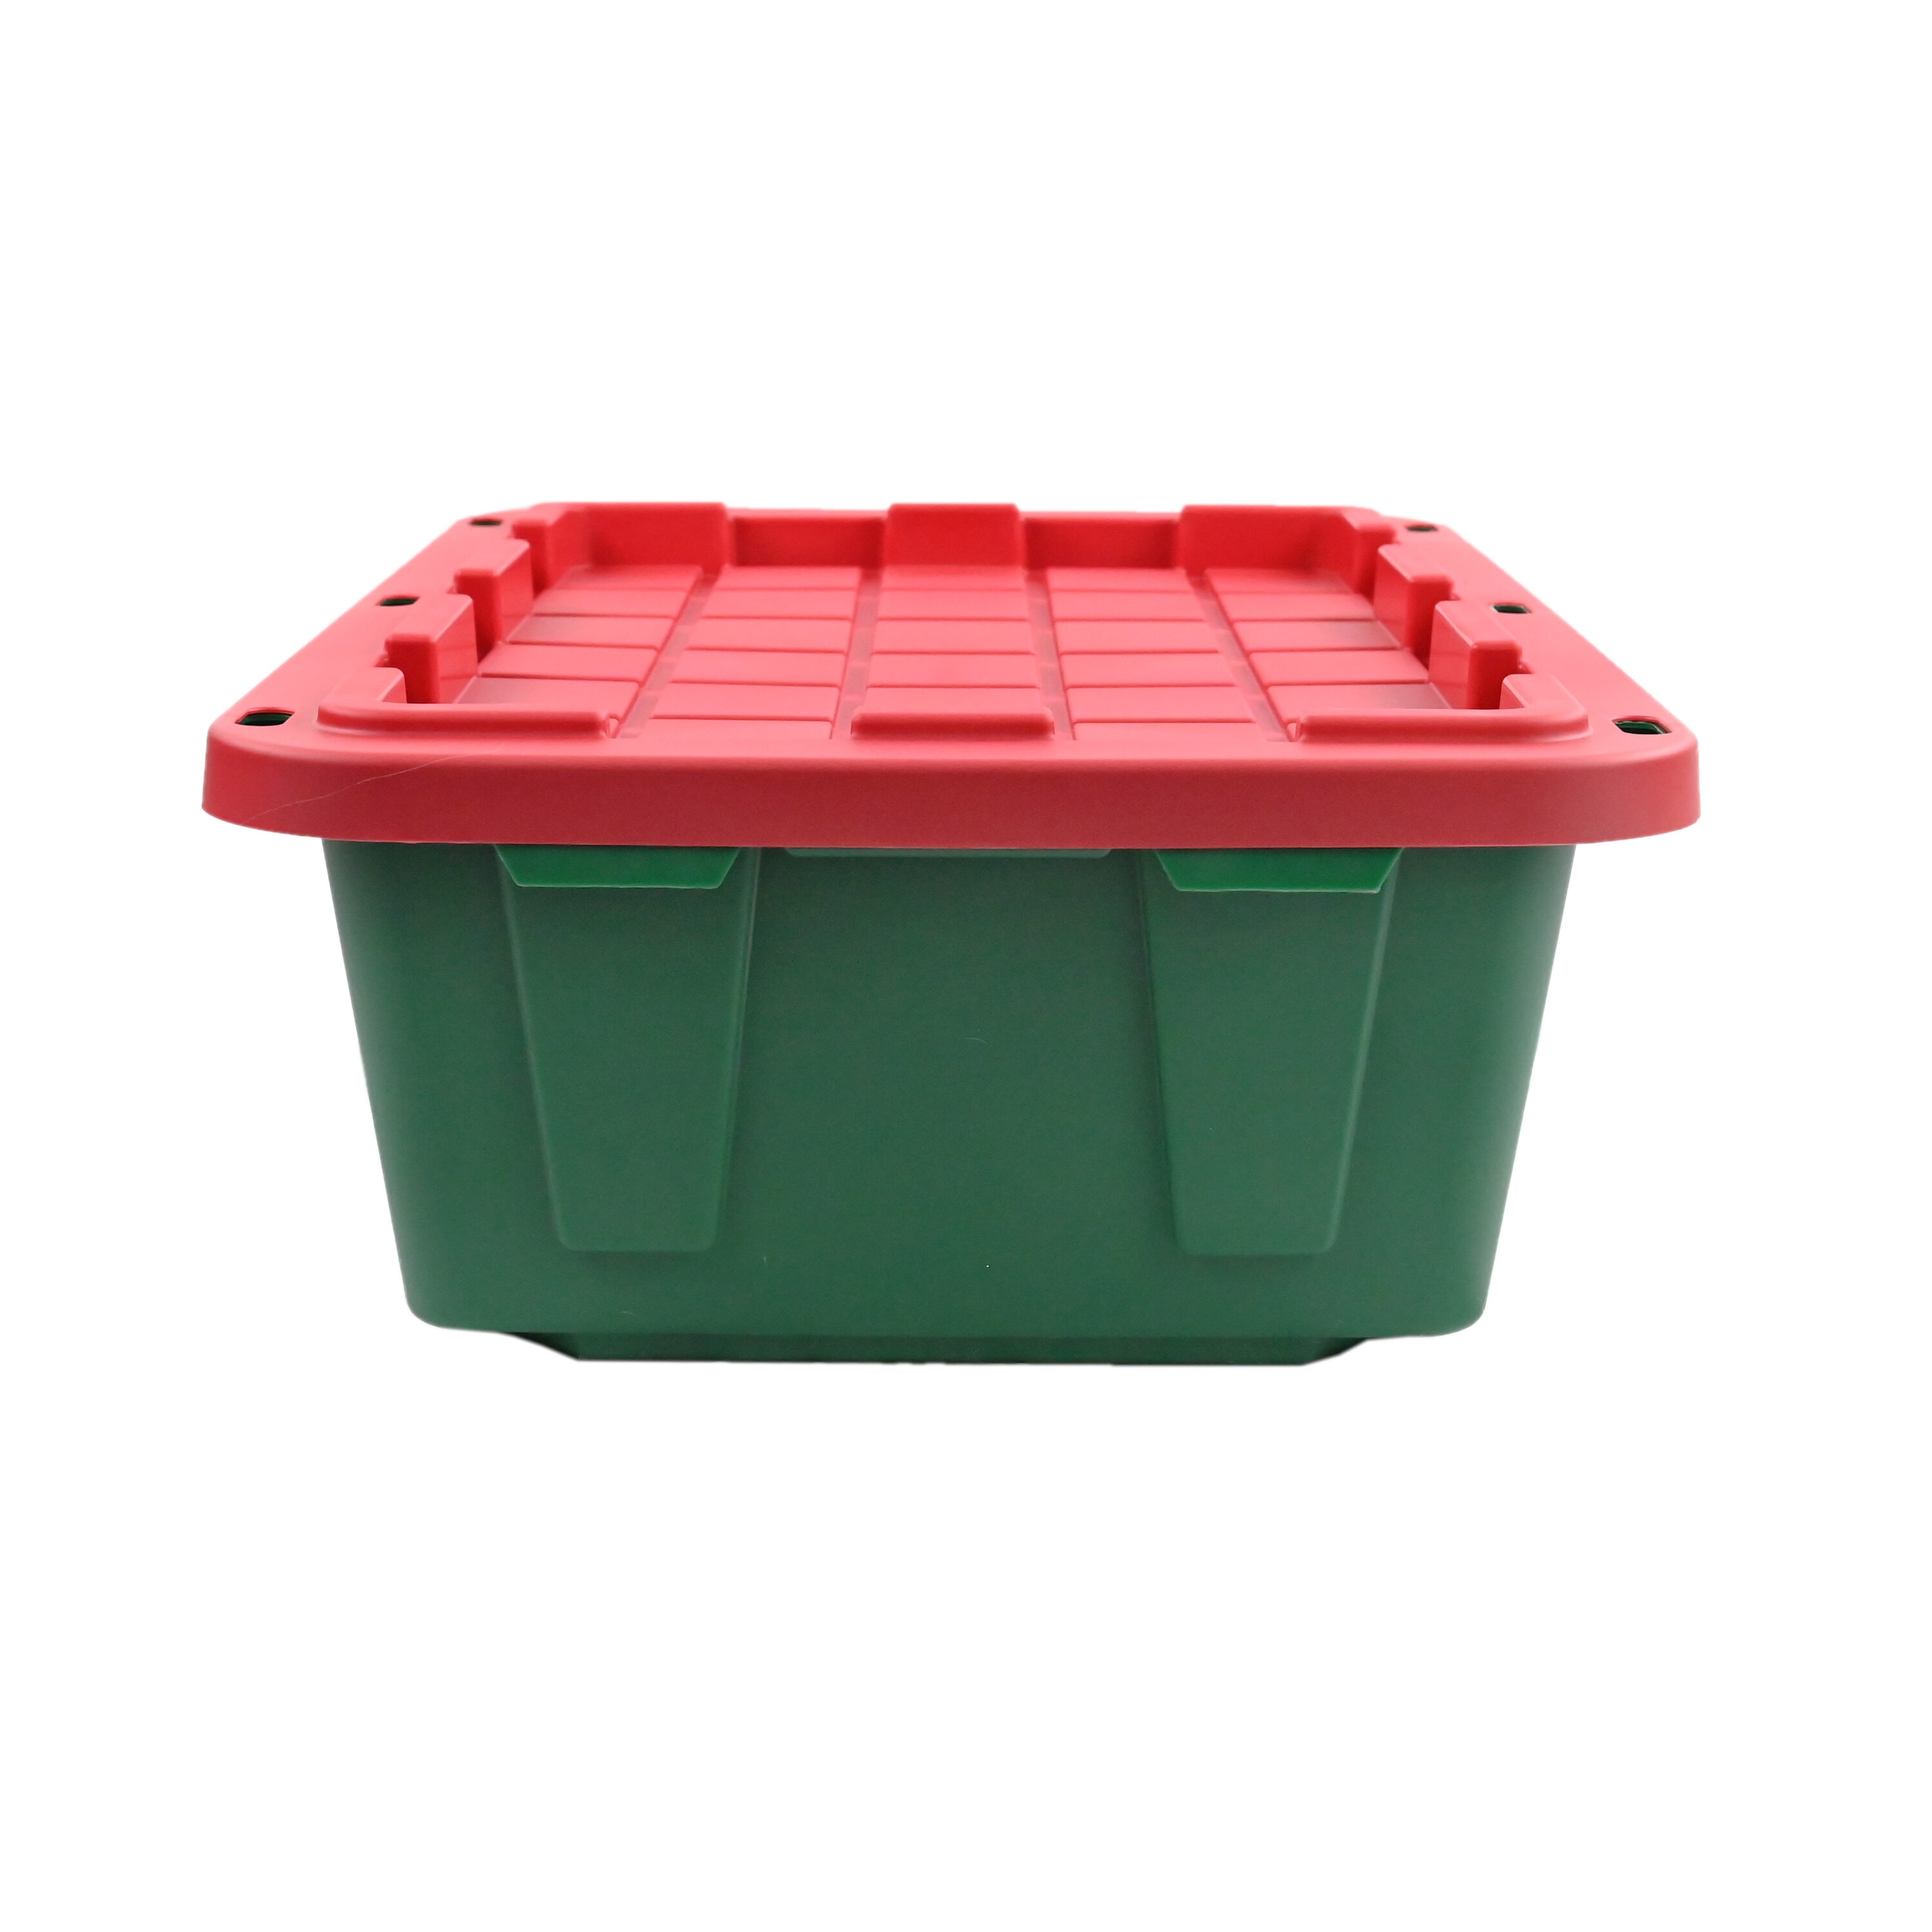 BetterJonny 15-Color KAM Snaps, 150 Sets with Storage Container